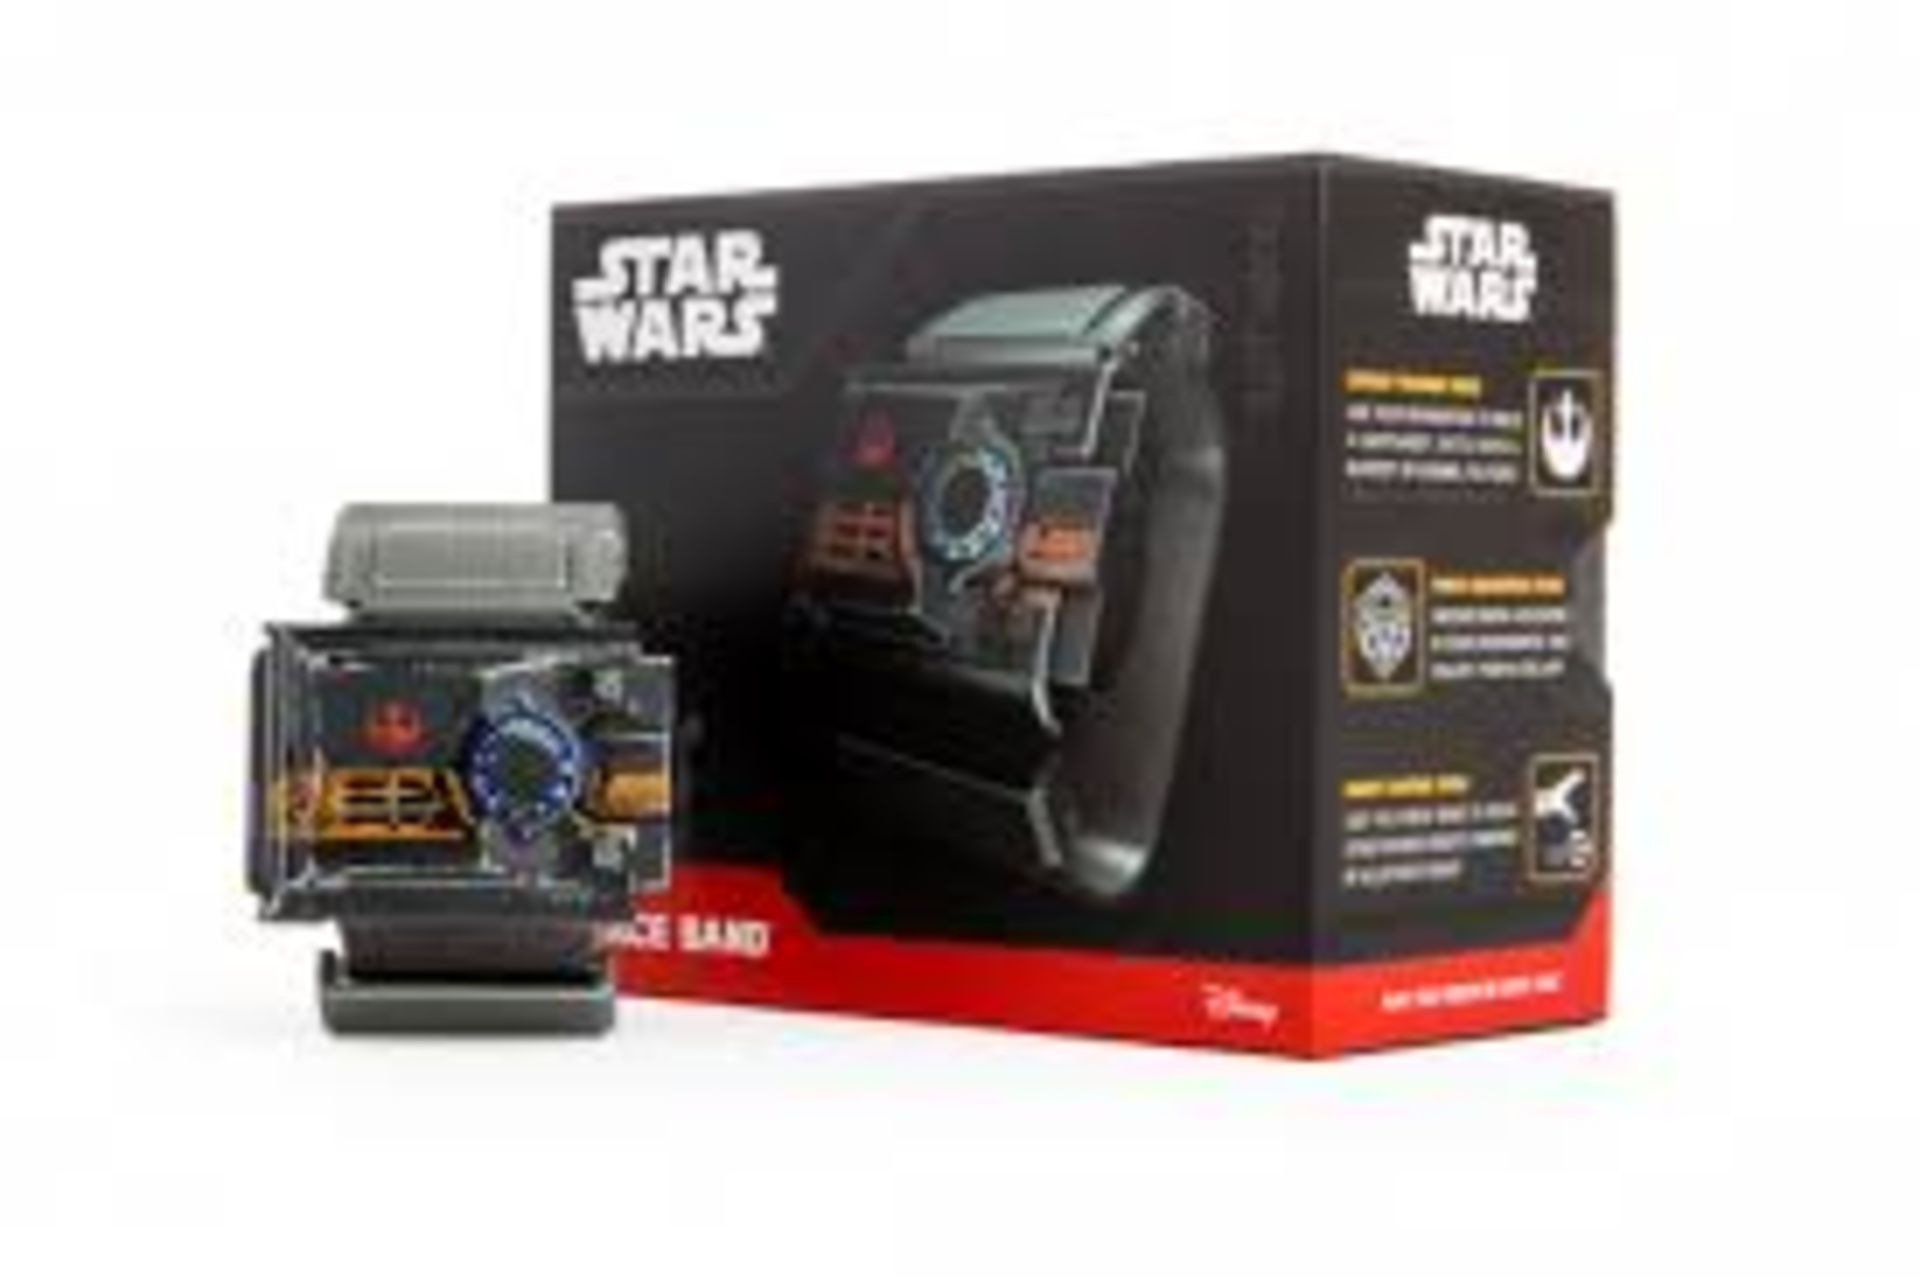 Boxed Star Wars Sphero Force Band Interactive Bracelet RRP £60 (Puplic Viewings And Appraisals